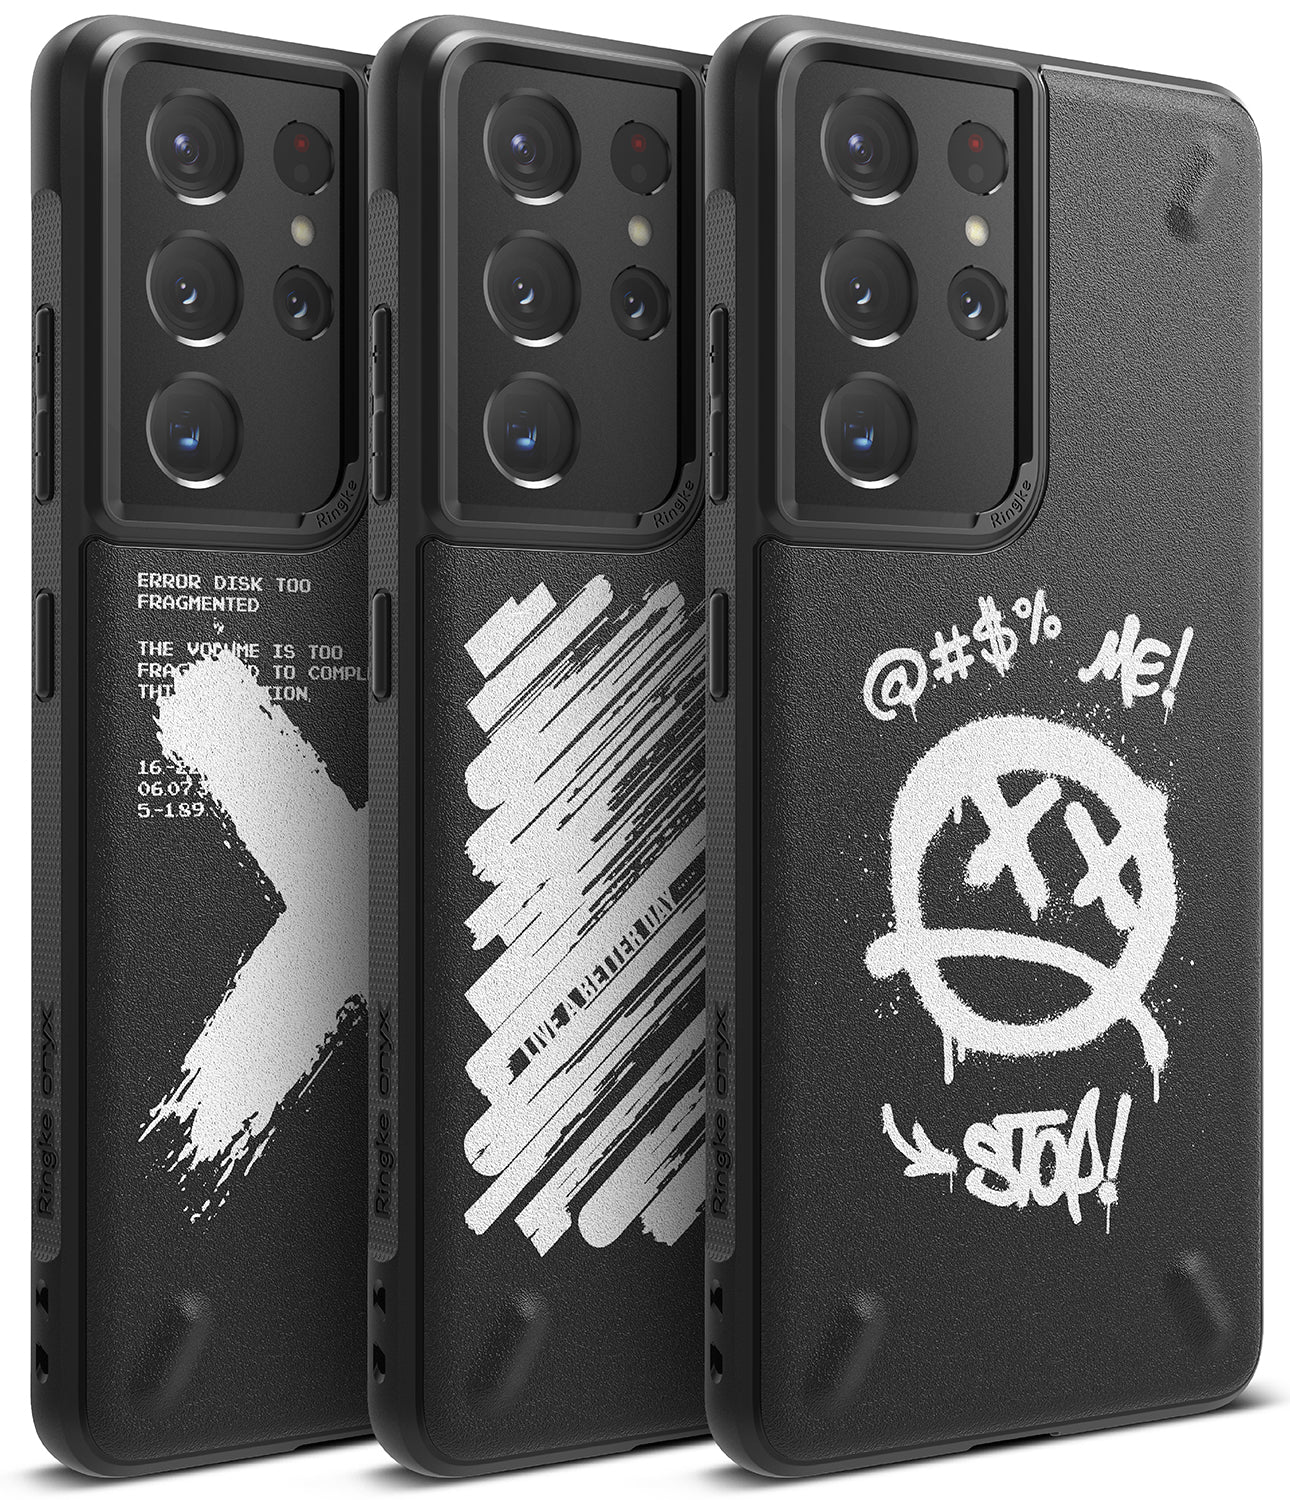 Galaxy S21 Case  Fusion-X Design – Ringke Official Store